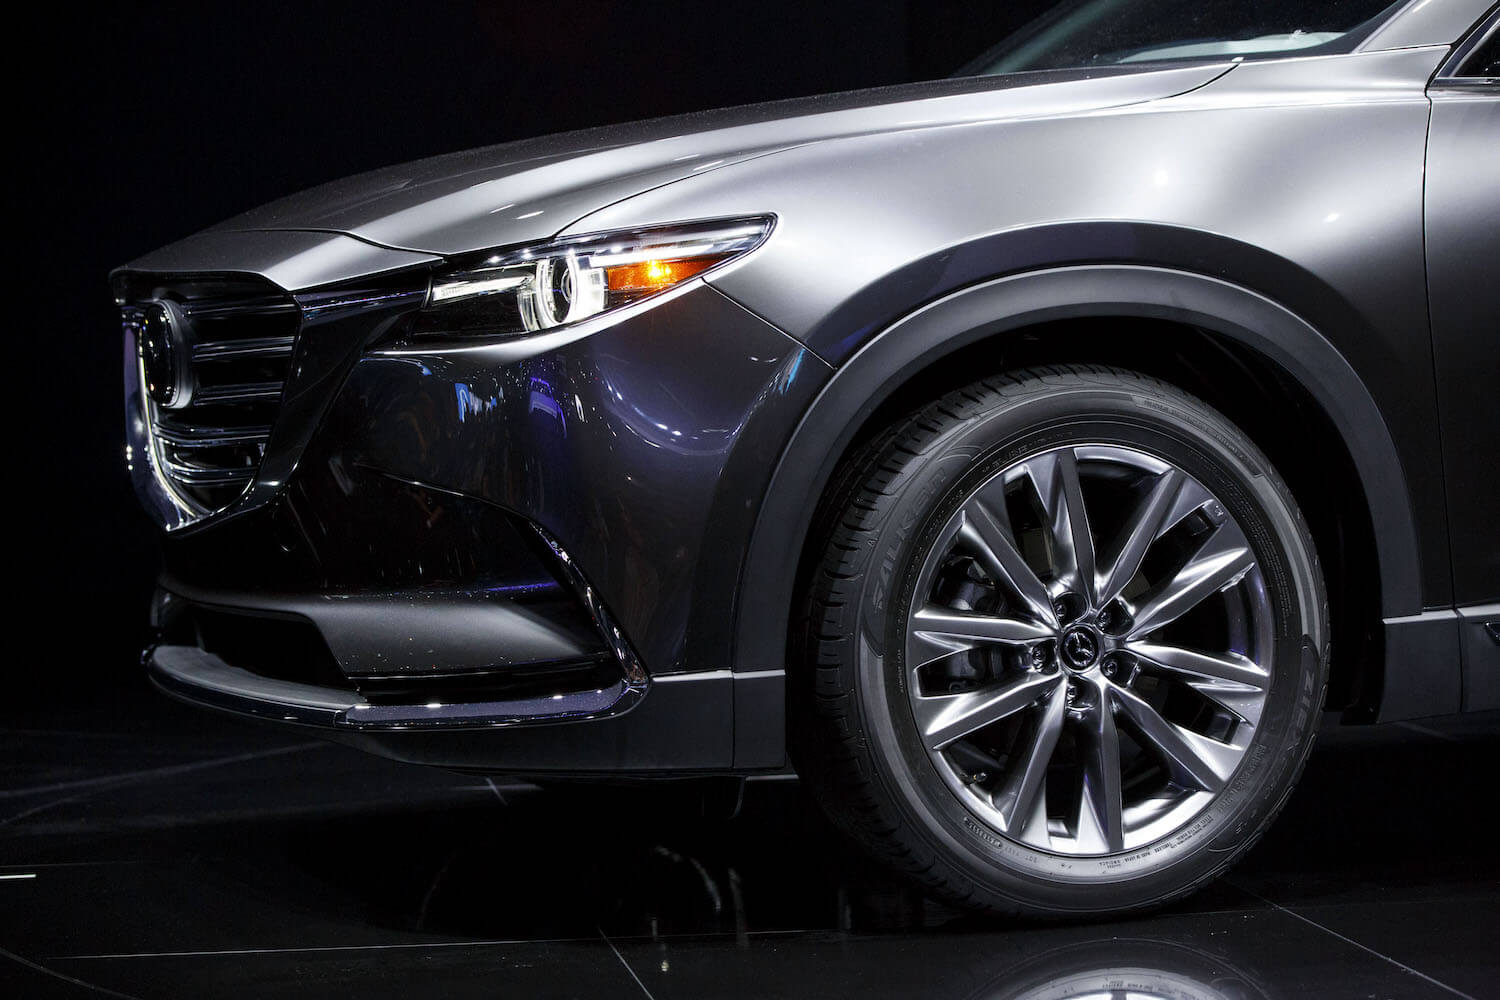 The gray Mazda CX-9 midsize sports utility vehicle (SUV) is unveiled during the Los Angeles Auto Show